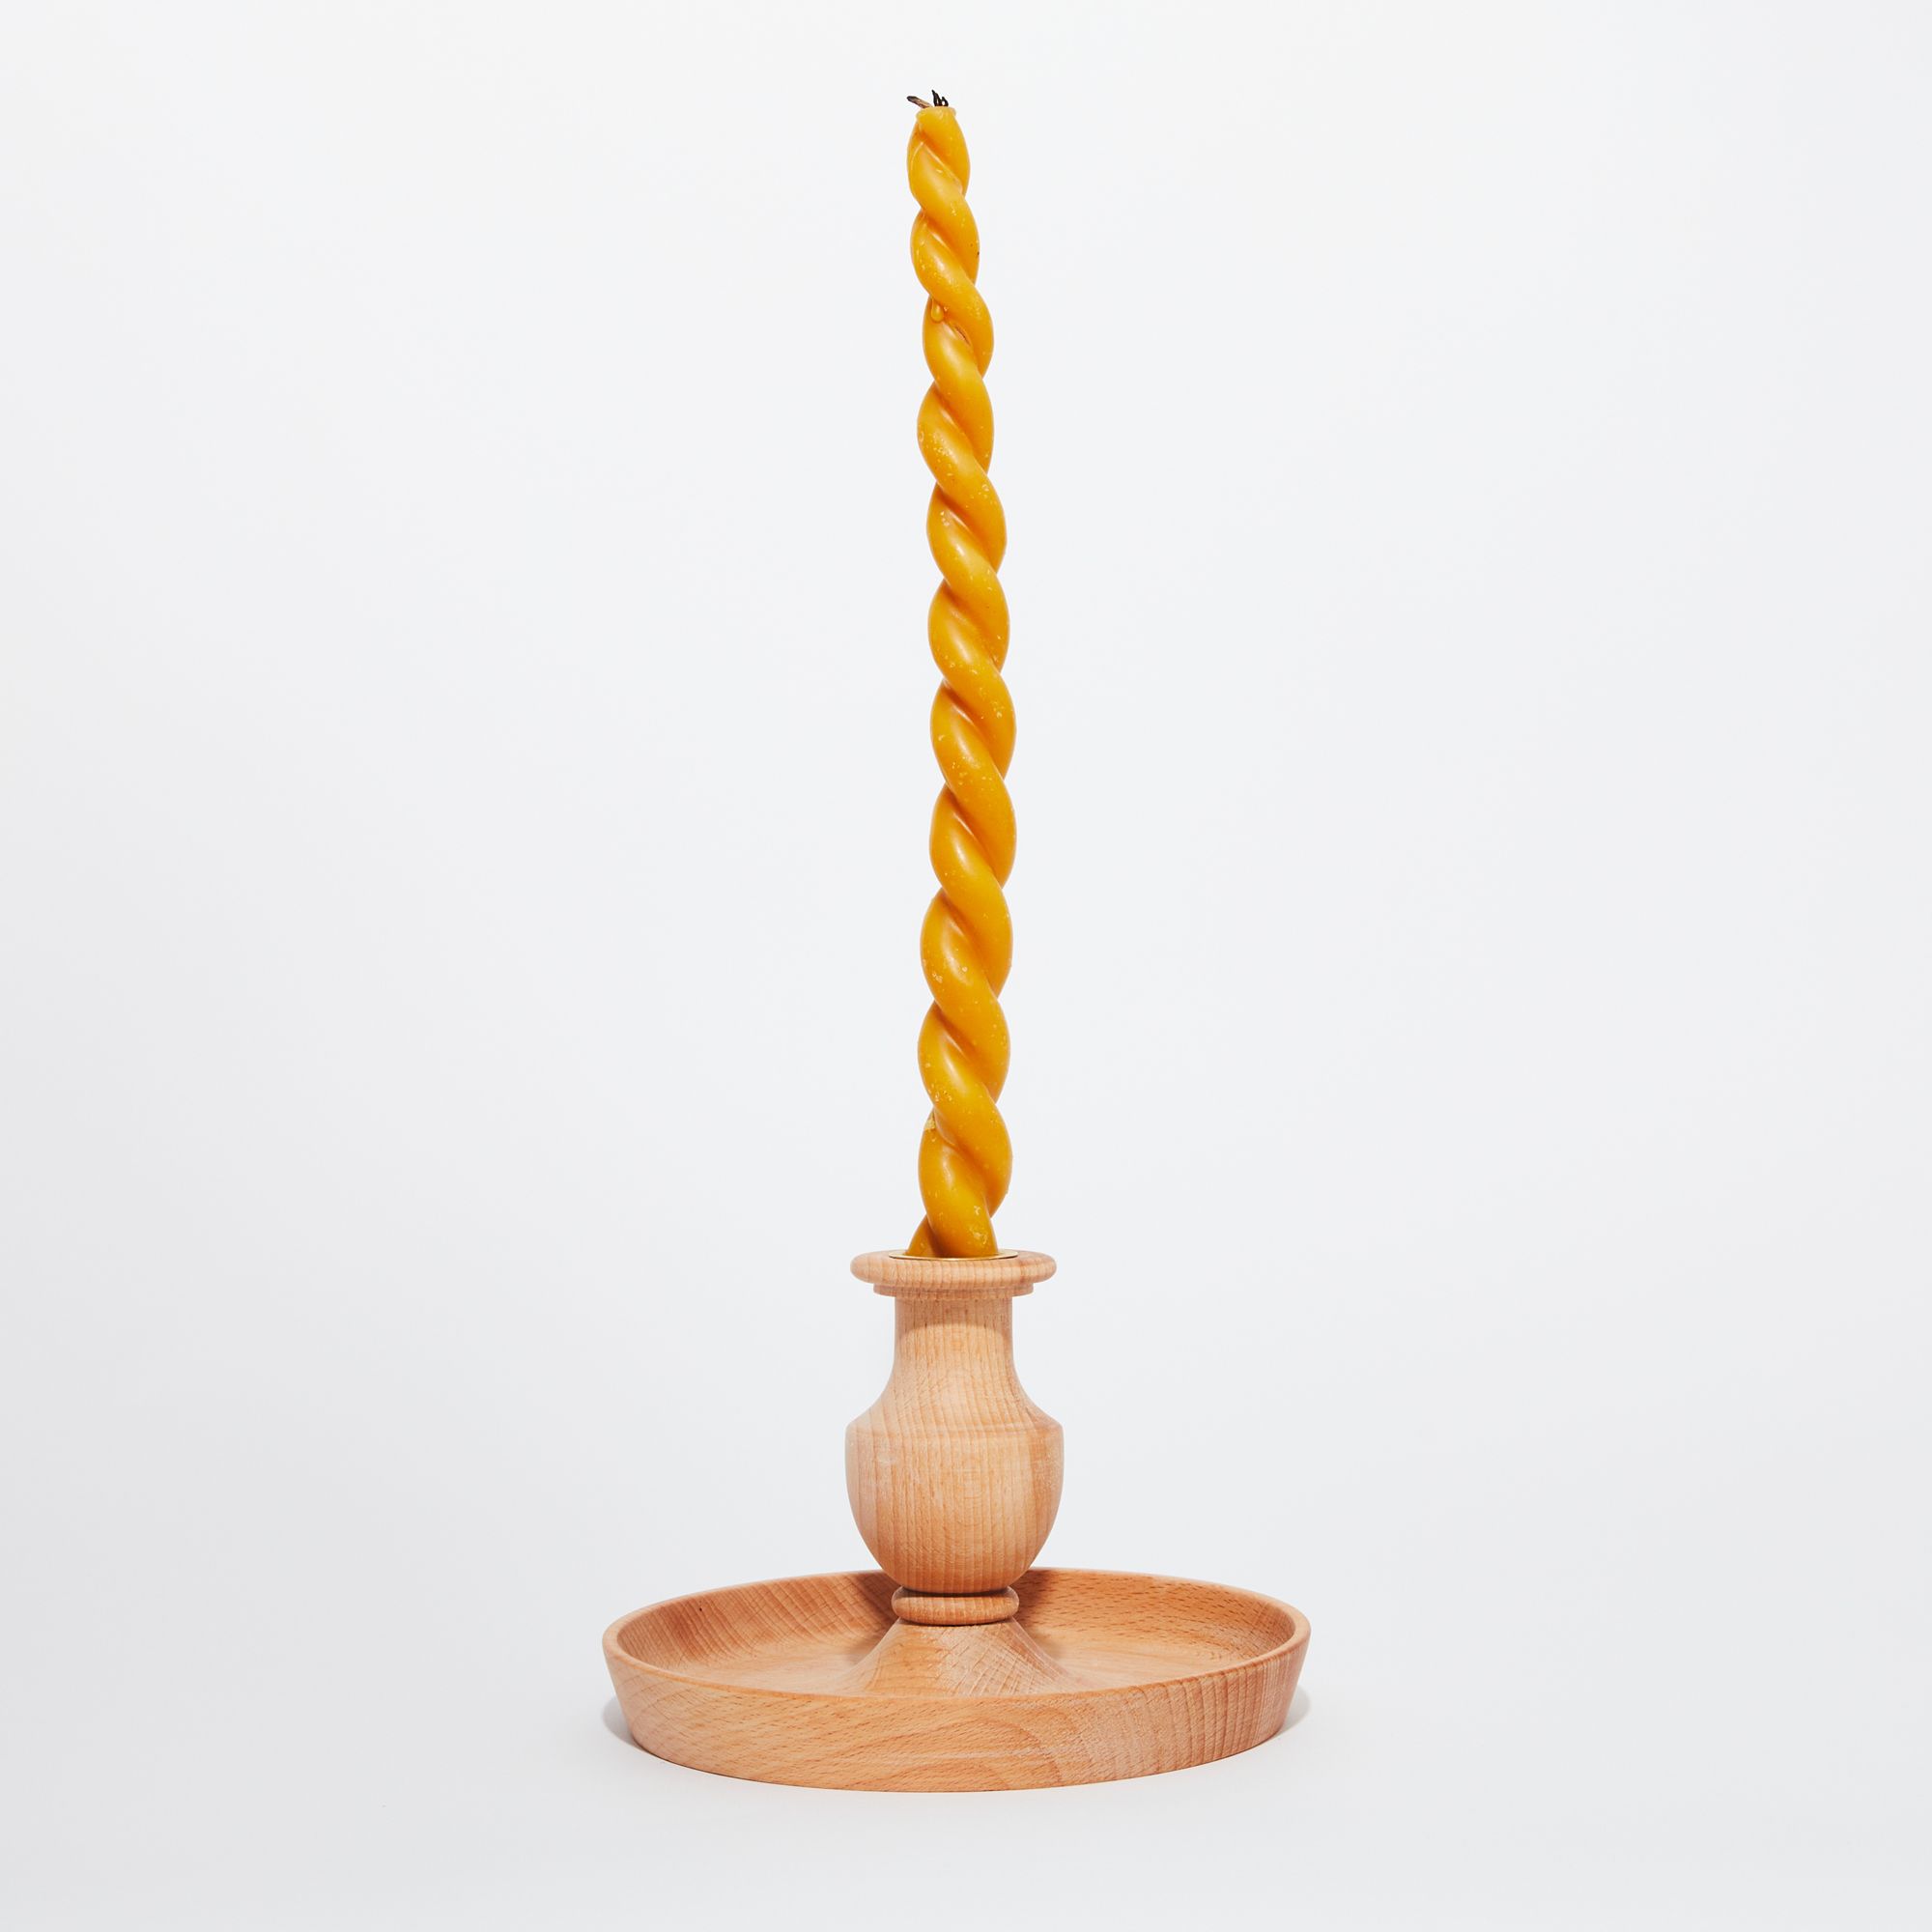 Wooden circular candle holder with tray with beeswax twist candle